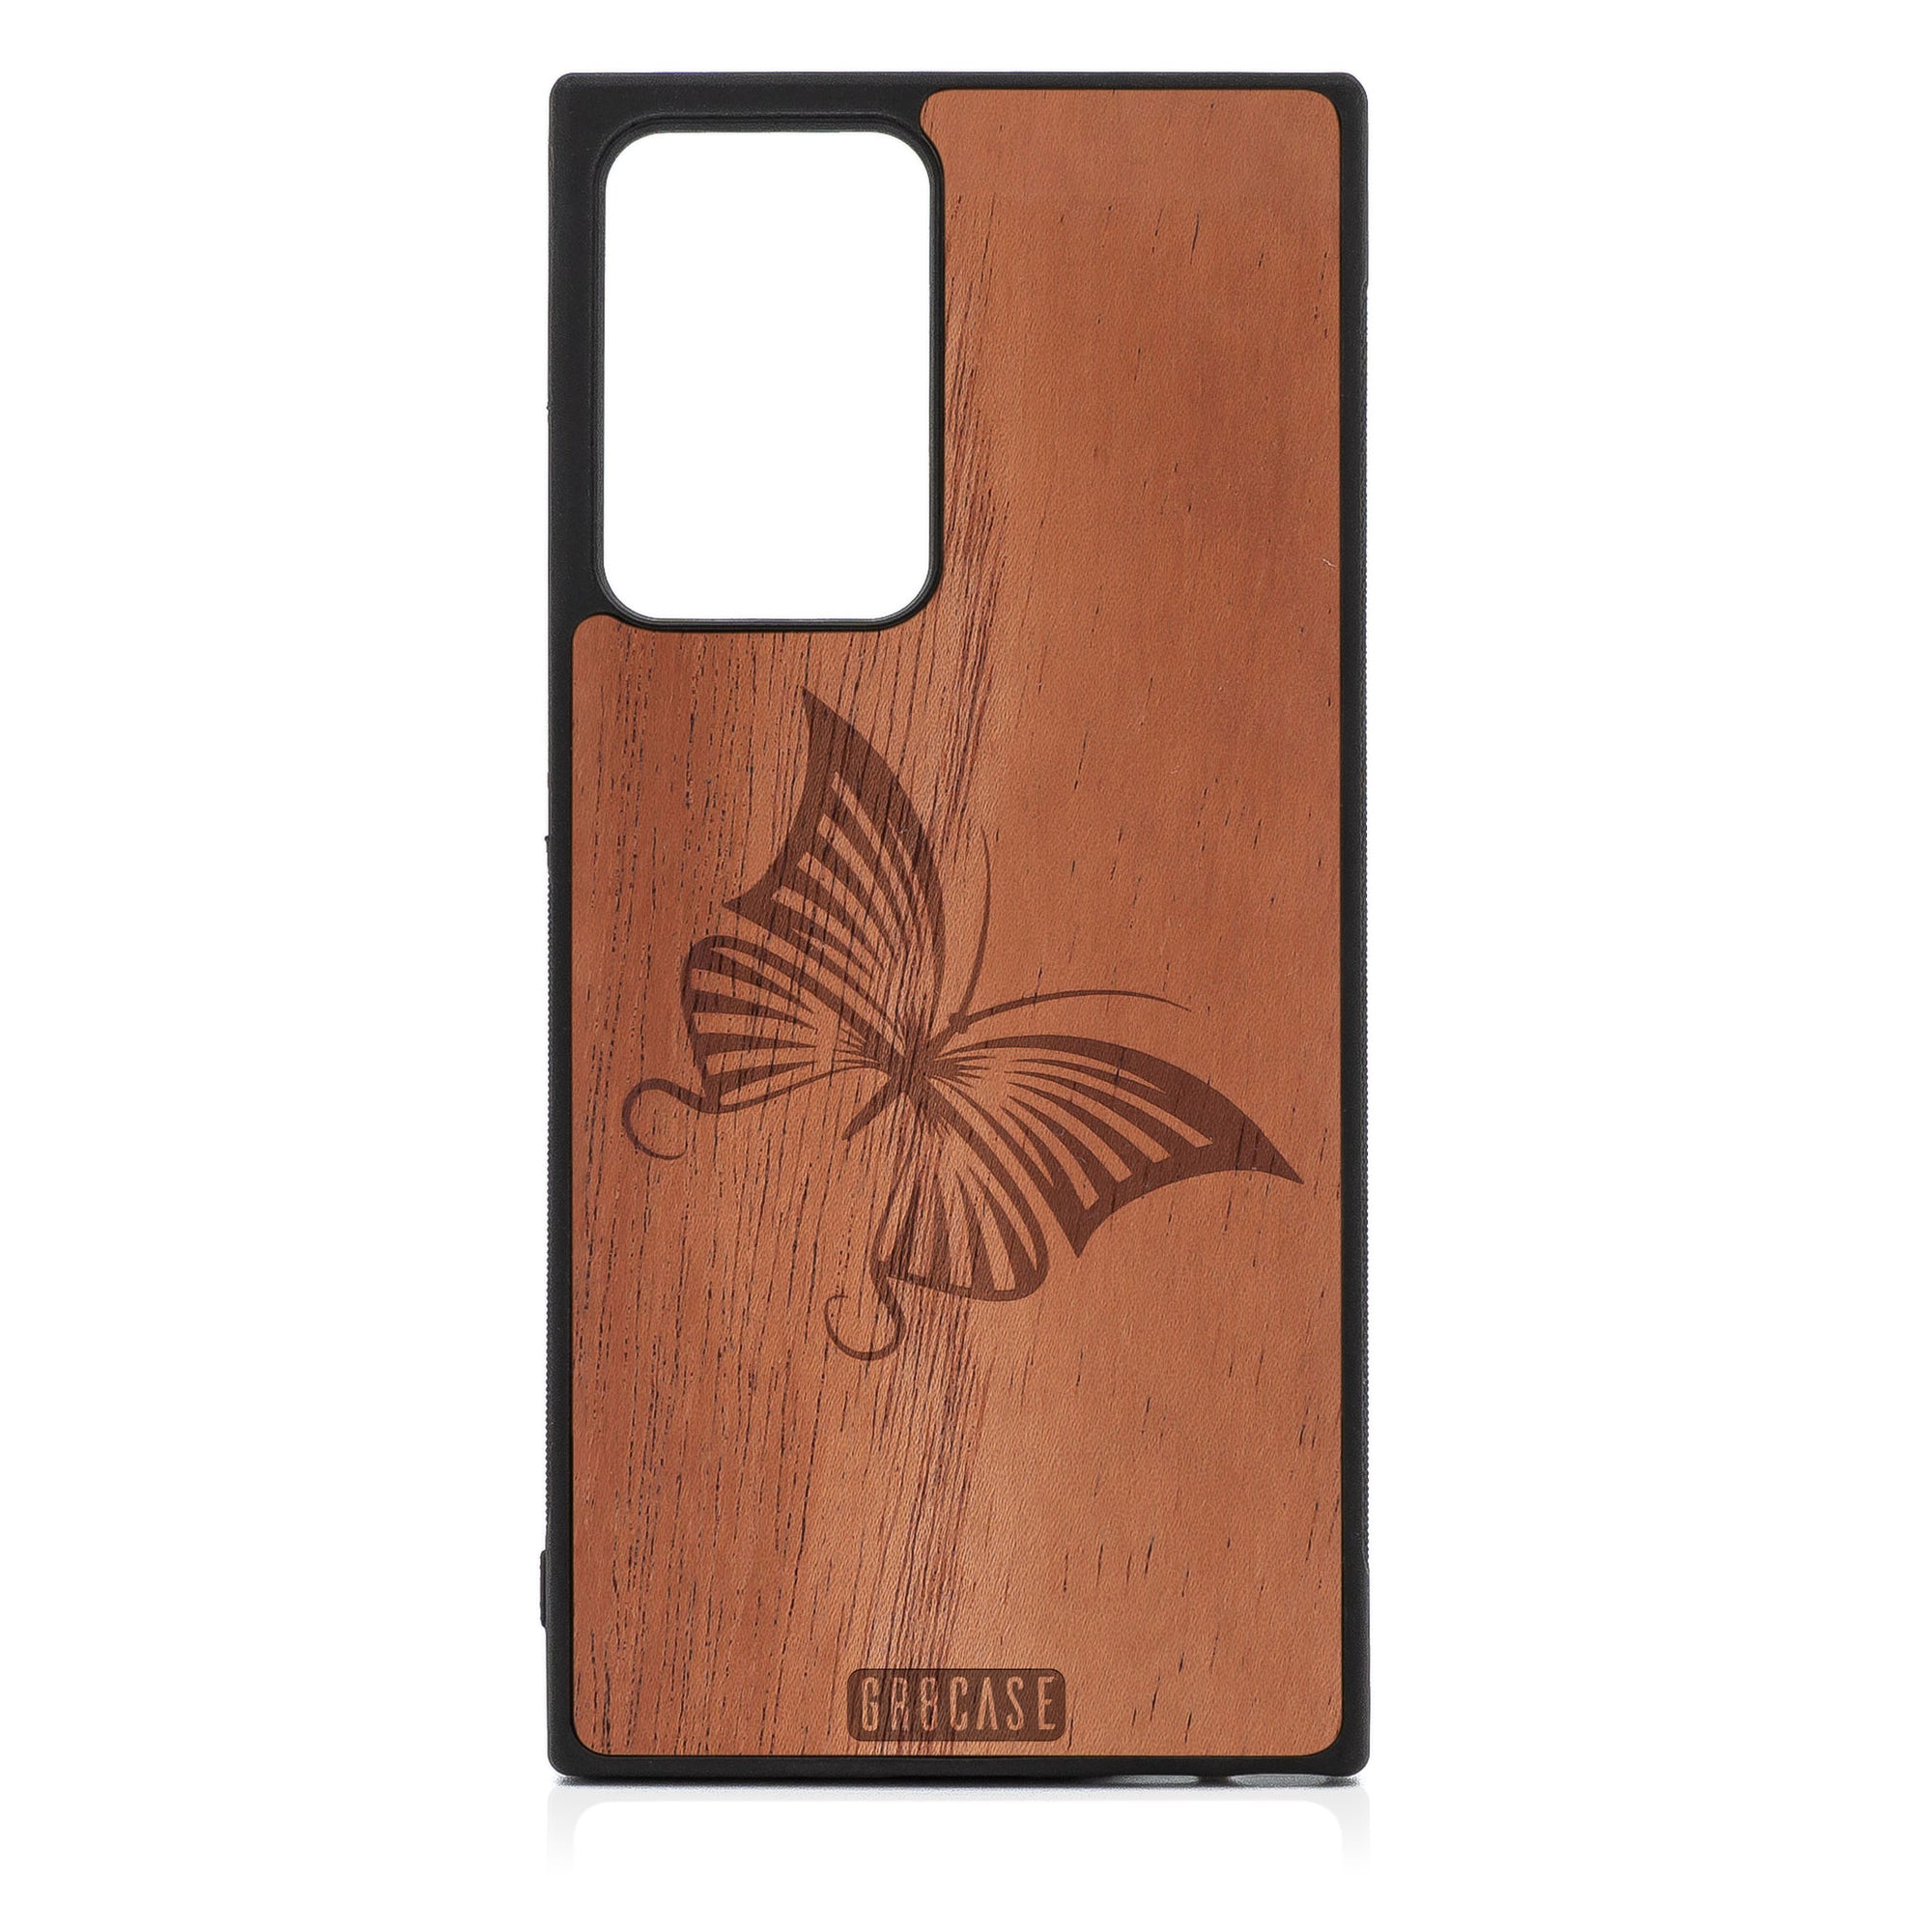 Butterfly Design Wood Case For Samsung Galaxy Note 20 Ultra